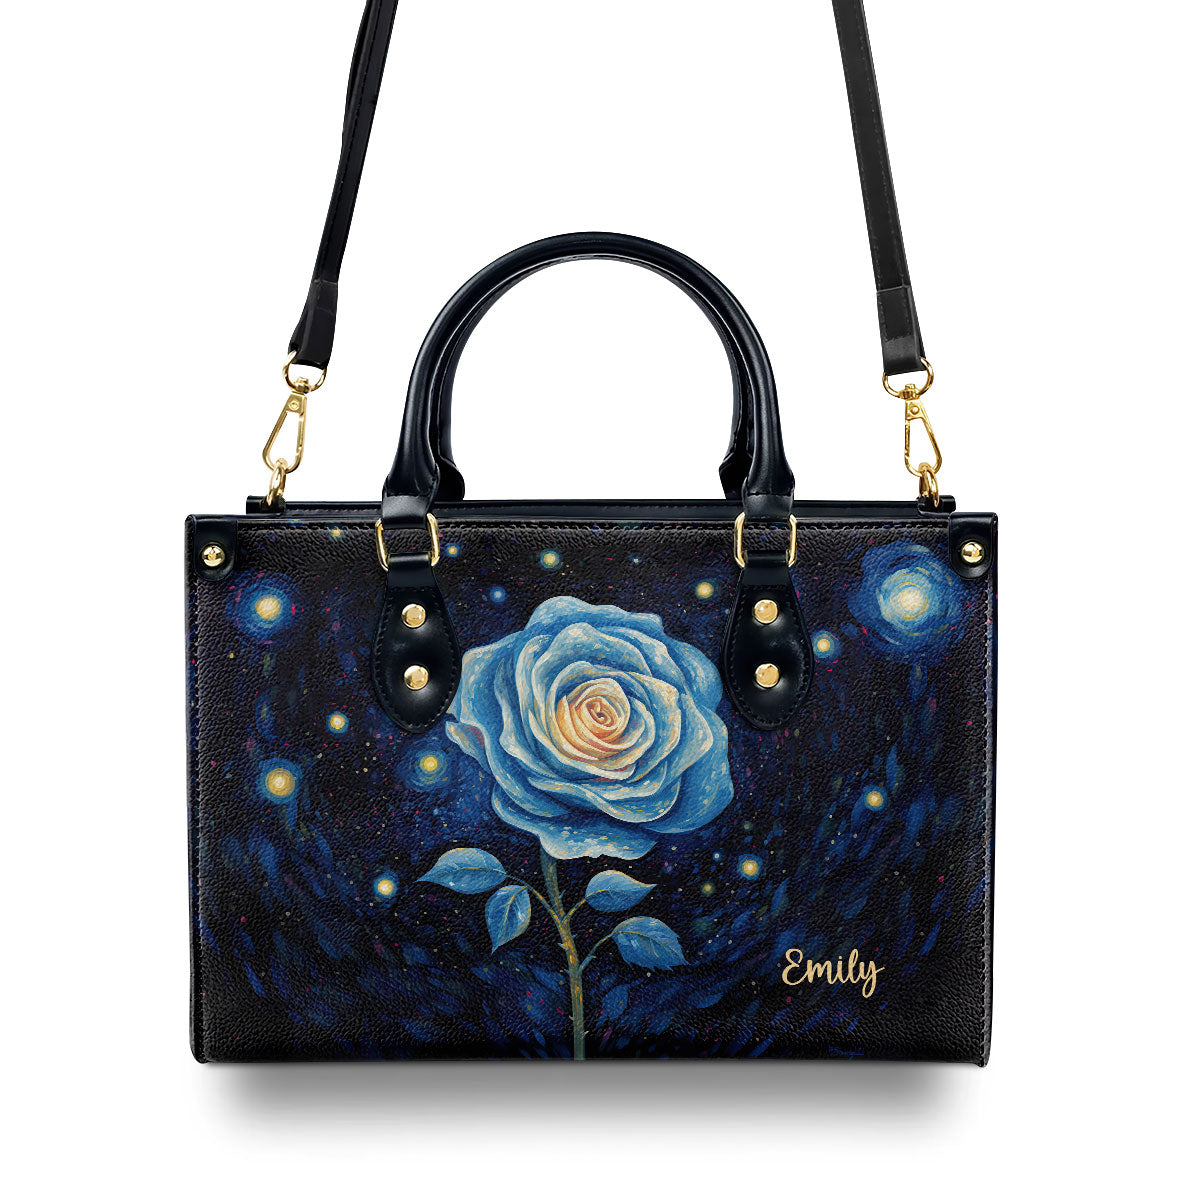 Rose In The Starry Night Style - Personalized Leather Handbag MSM16